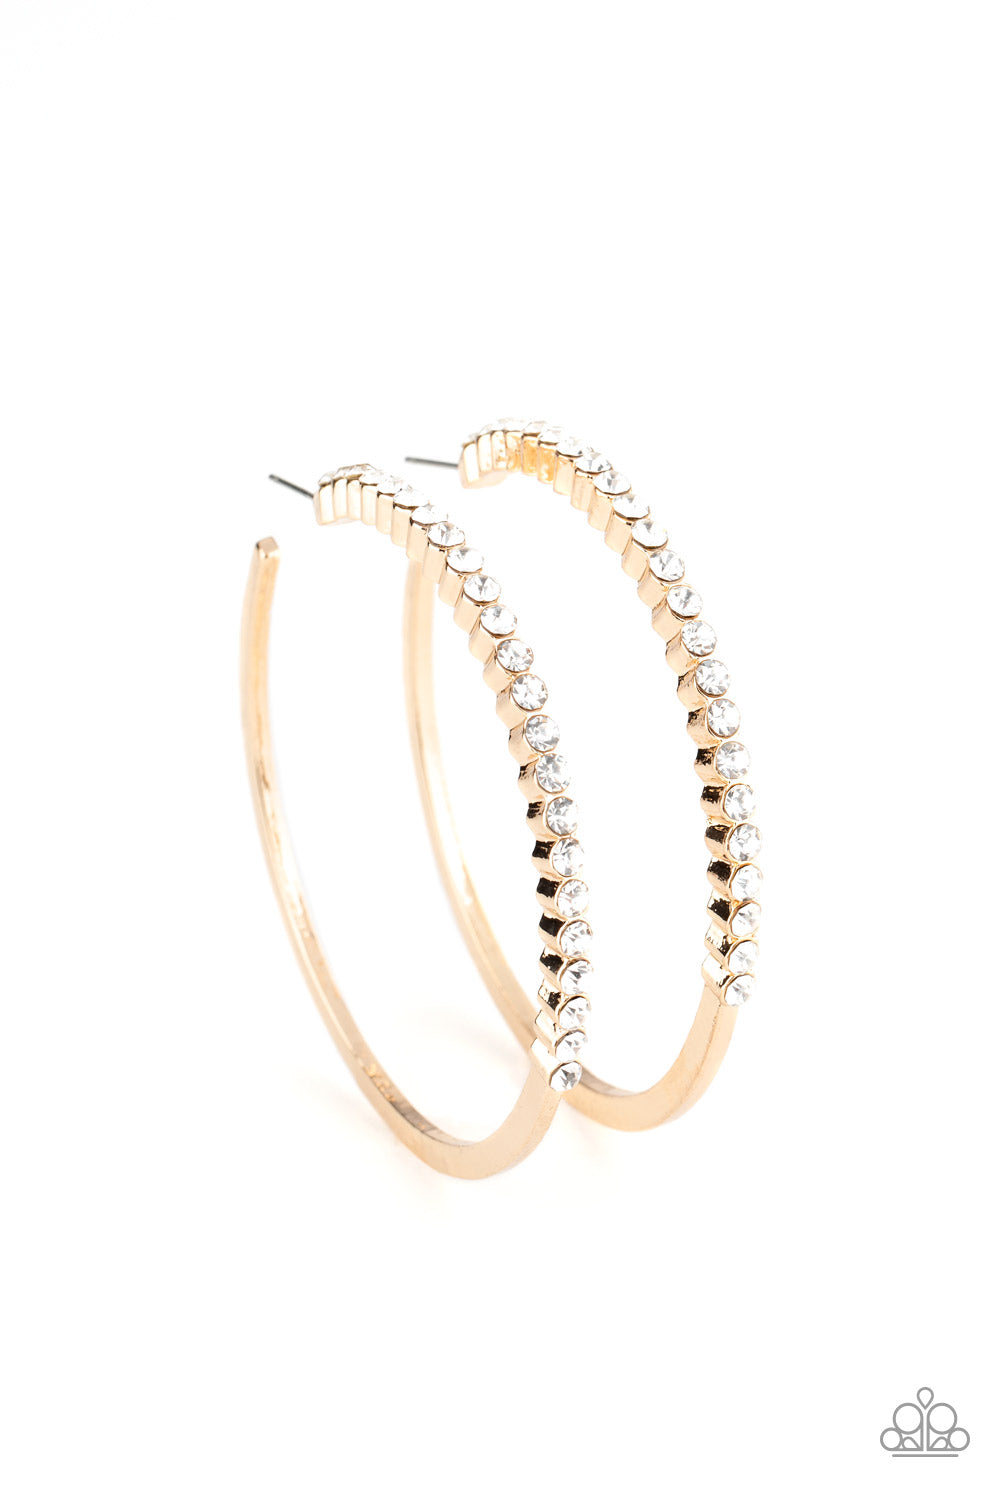 Paparazzi Making Rounds - Gold Hoop Earrings - A Finishing Touch Jewelry